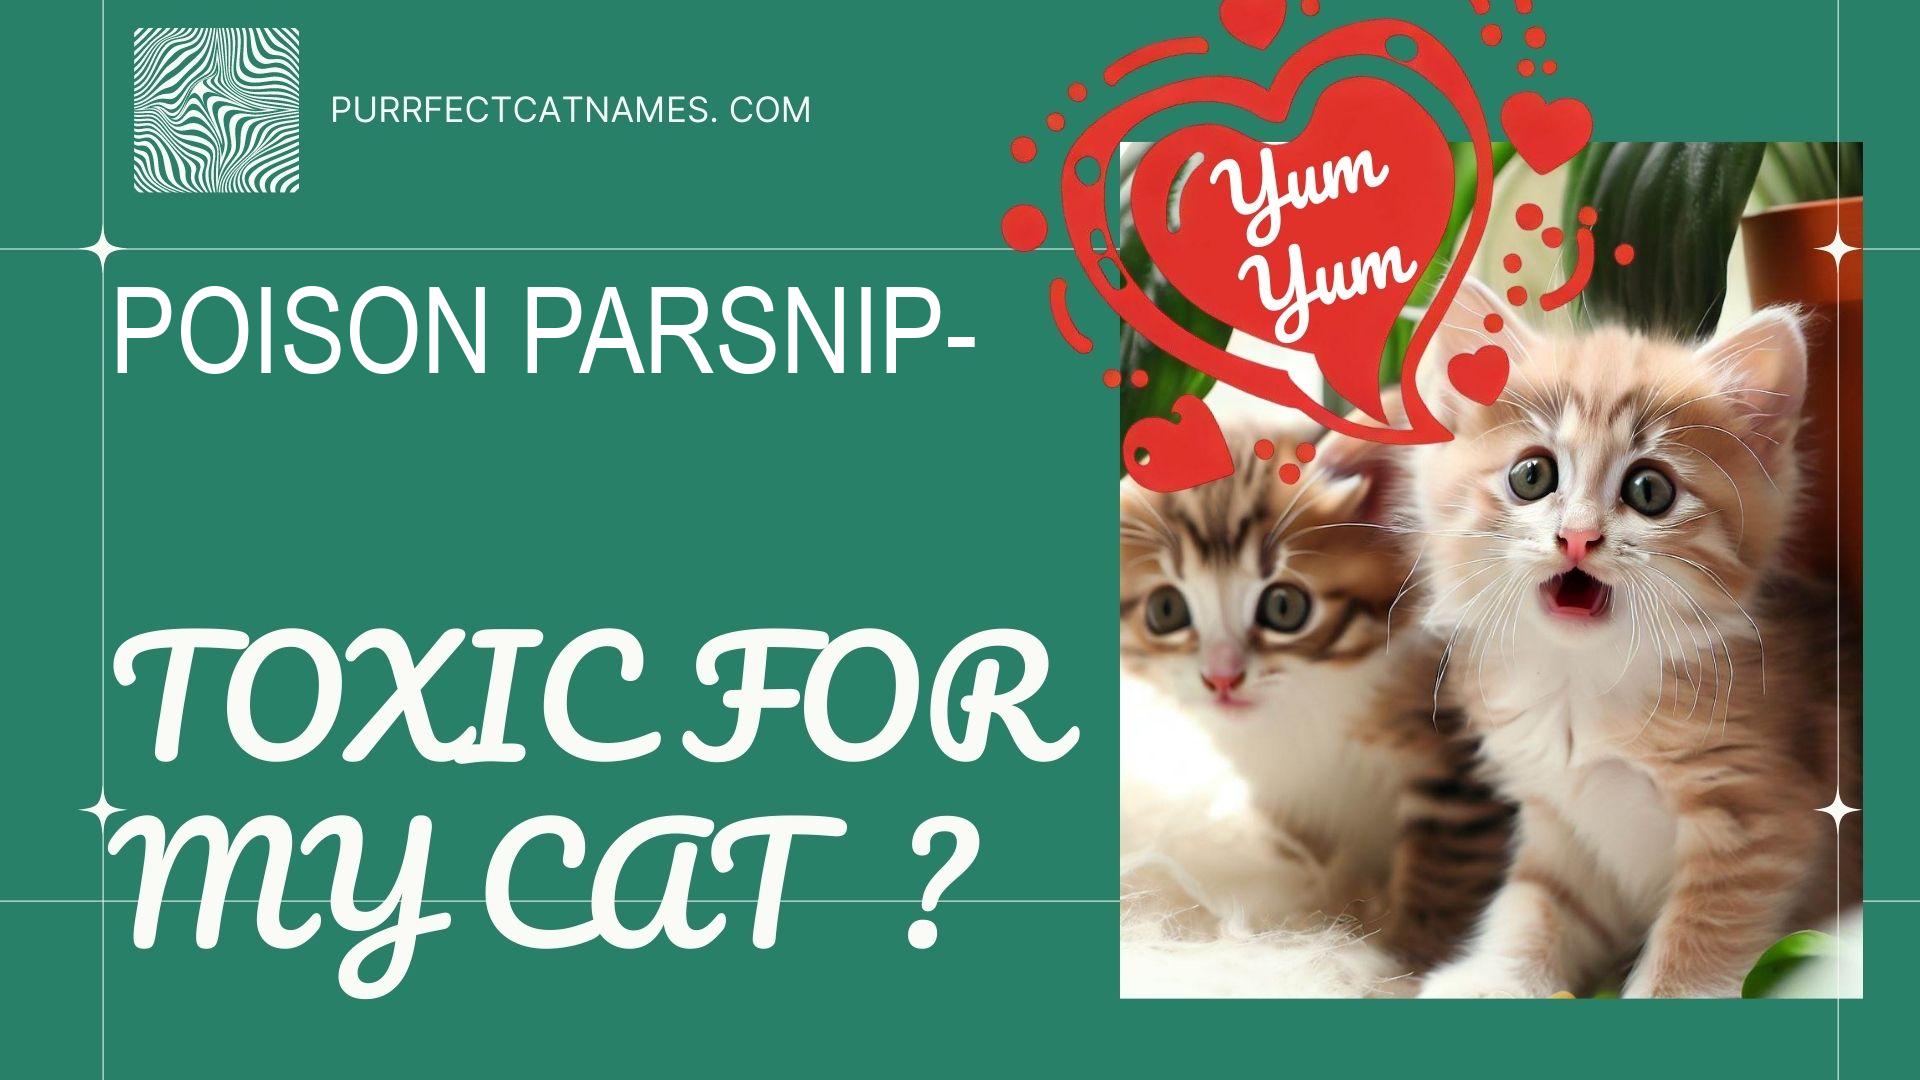 IsPoison Parsnip plant toxic for your cat